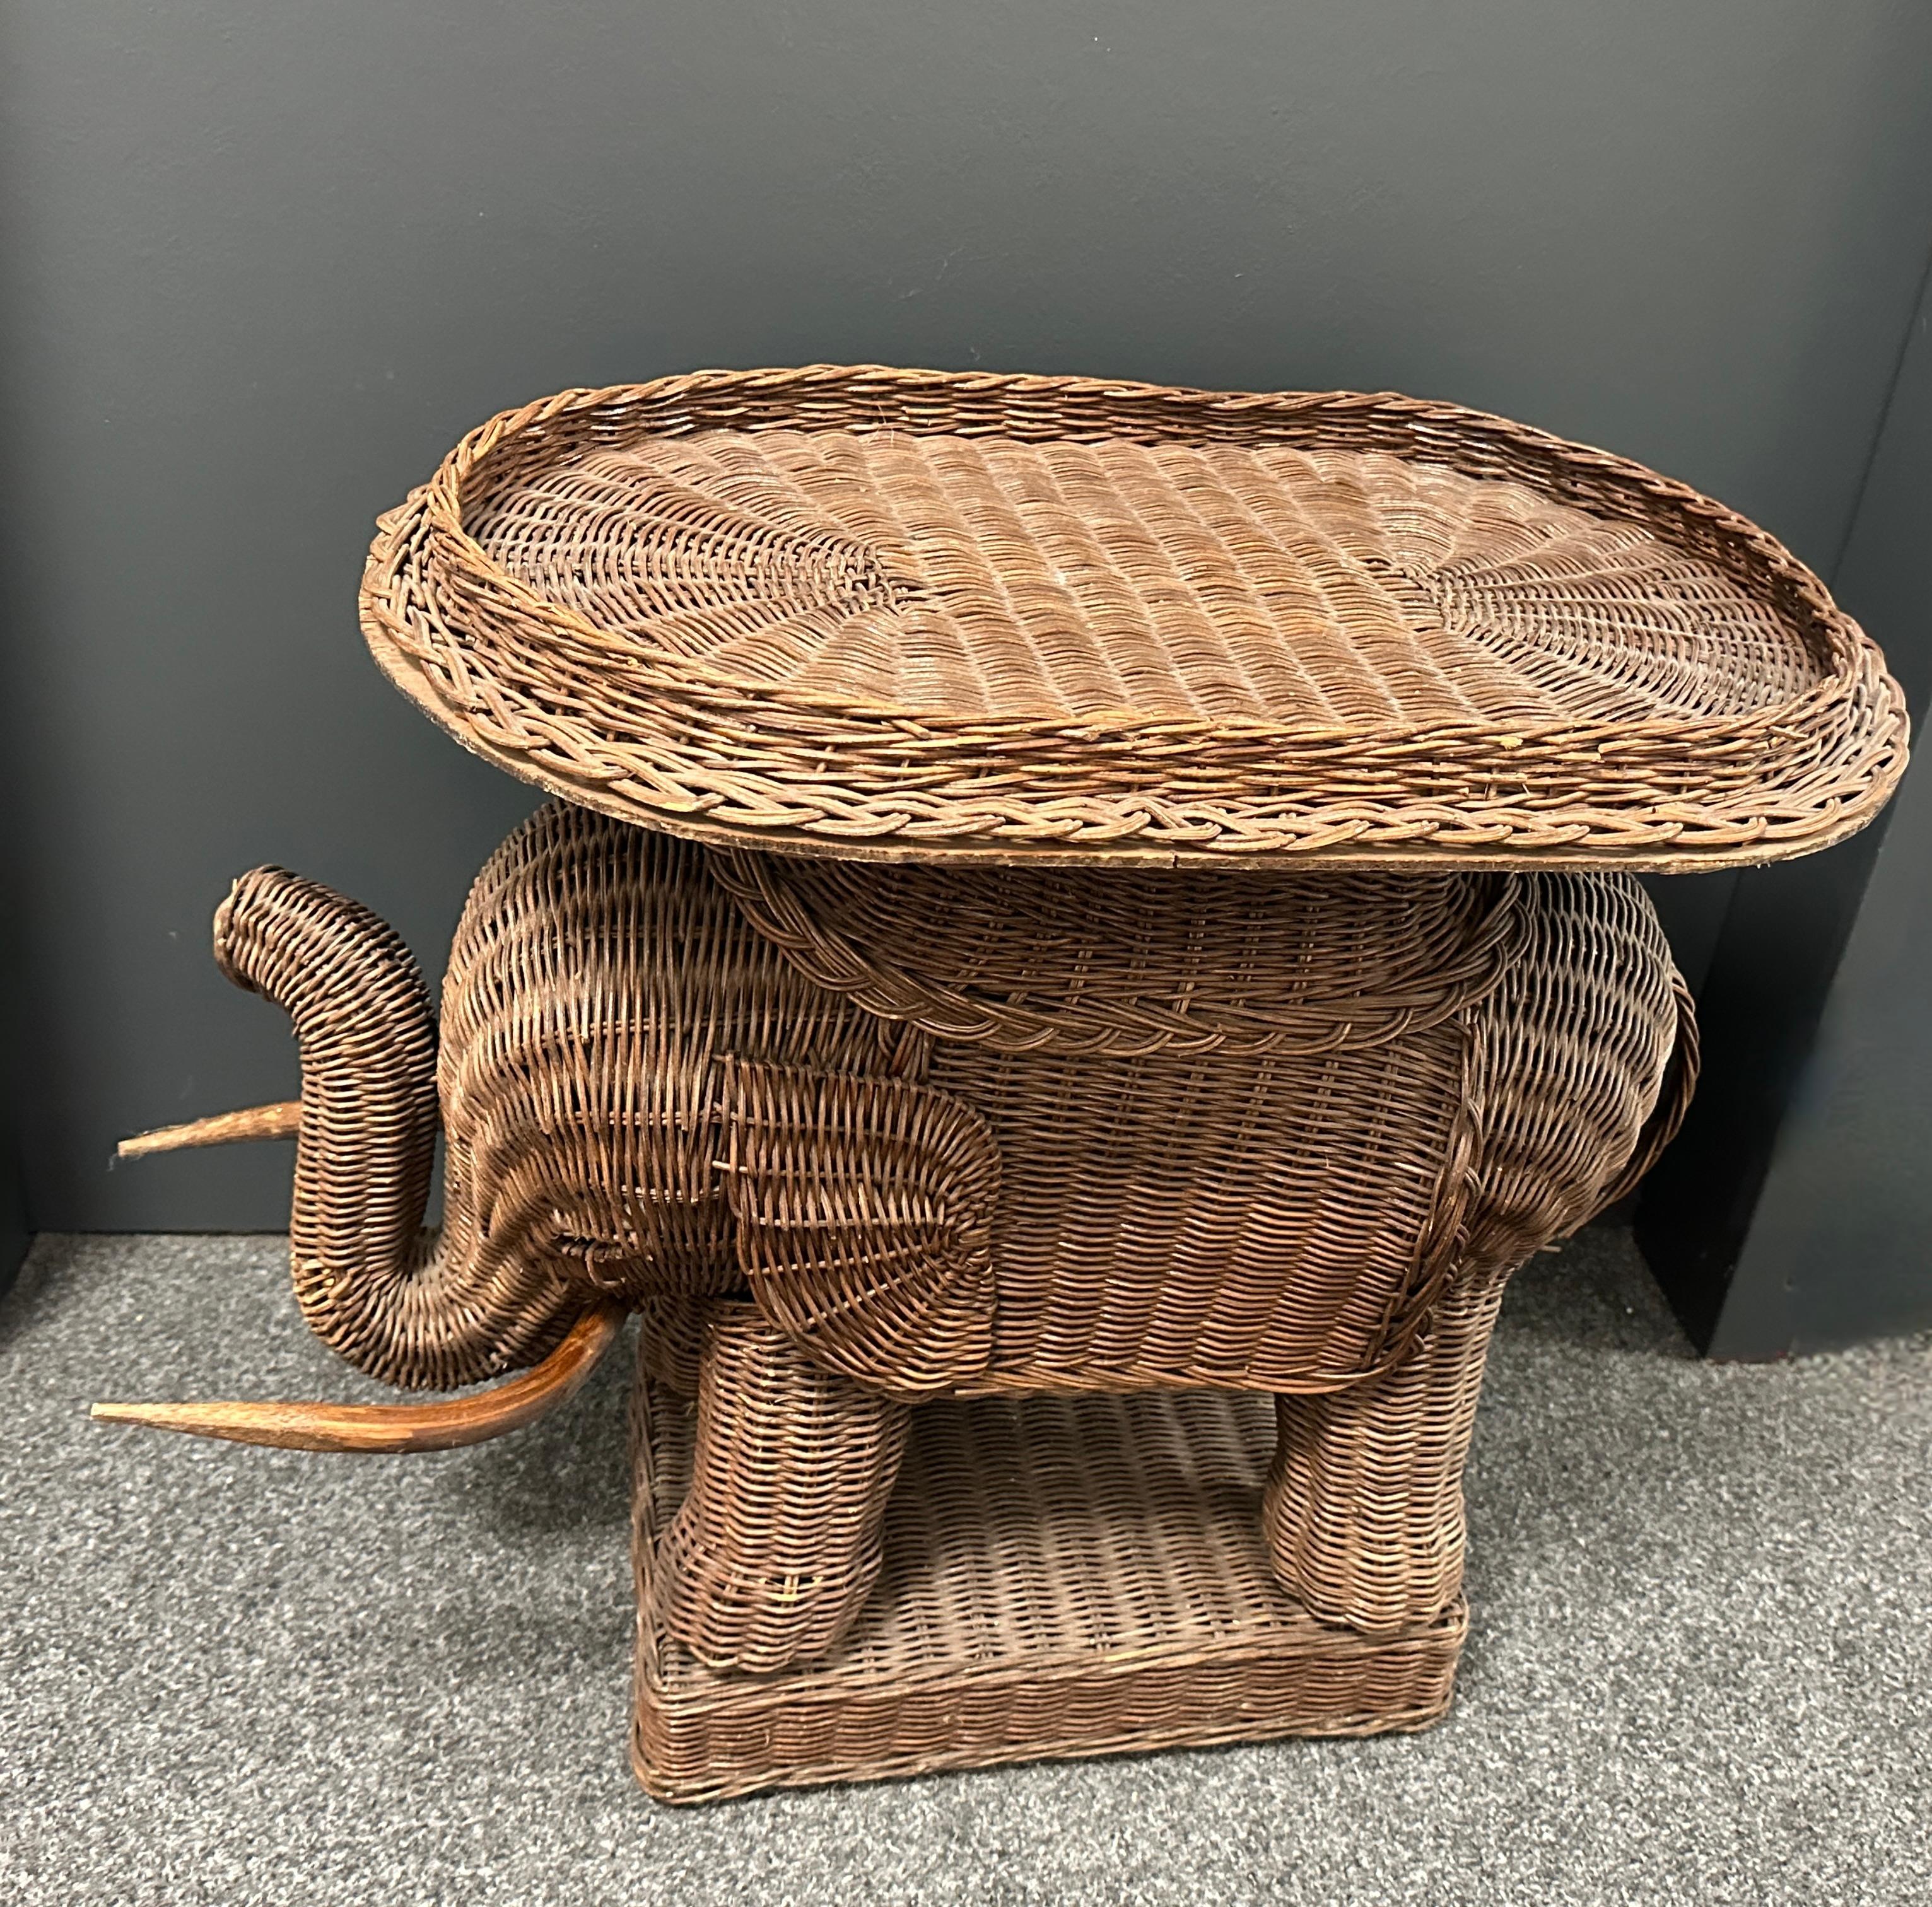 Stunning Rattan Wicker Elephant Side Table with Tray, France, 1960s For Sale 9